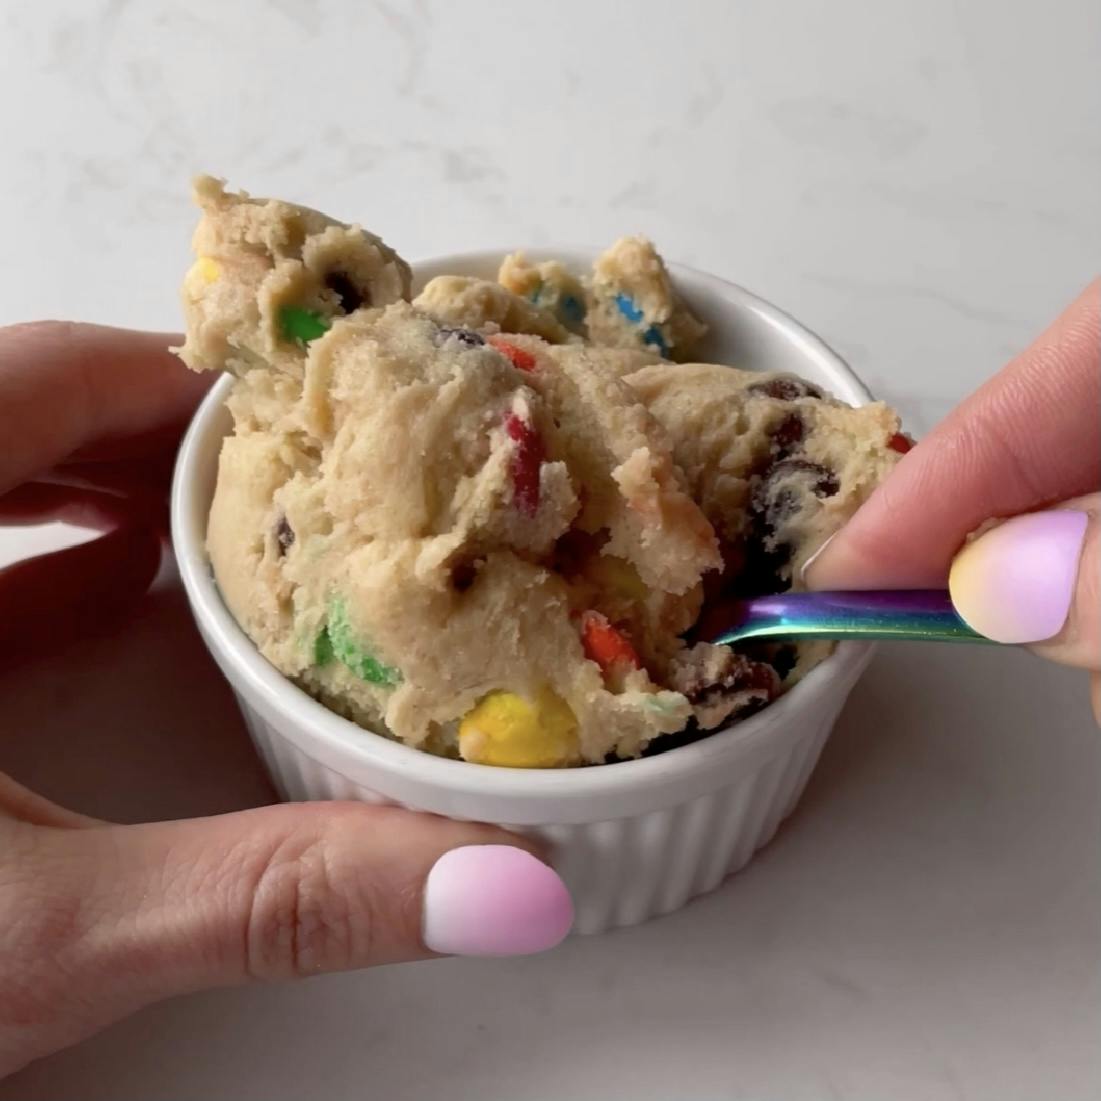 Picture for M&M Edible Cookie Dough